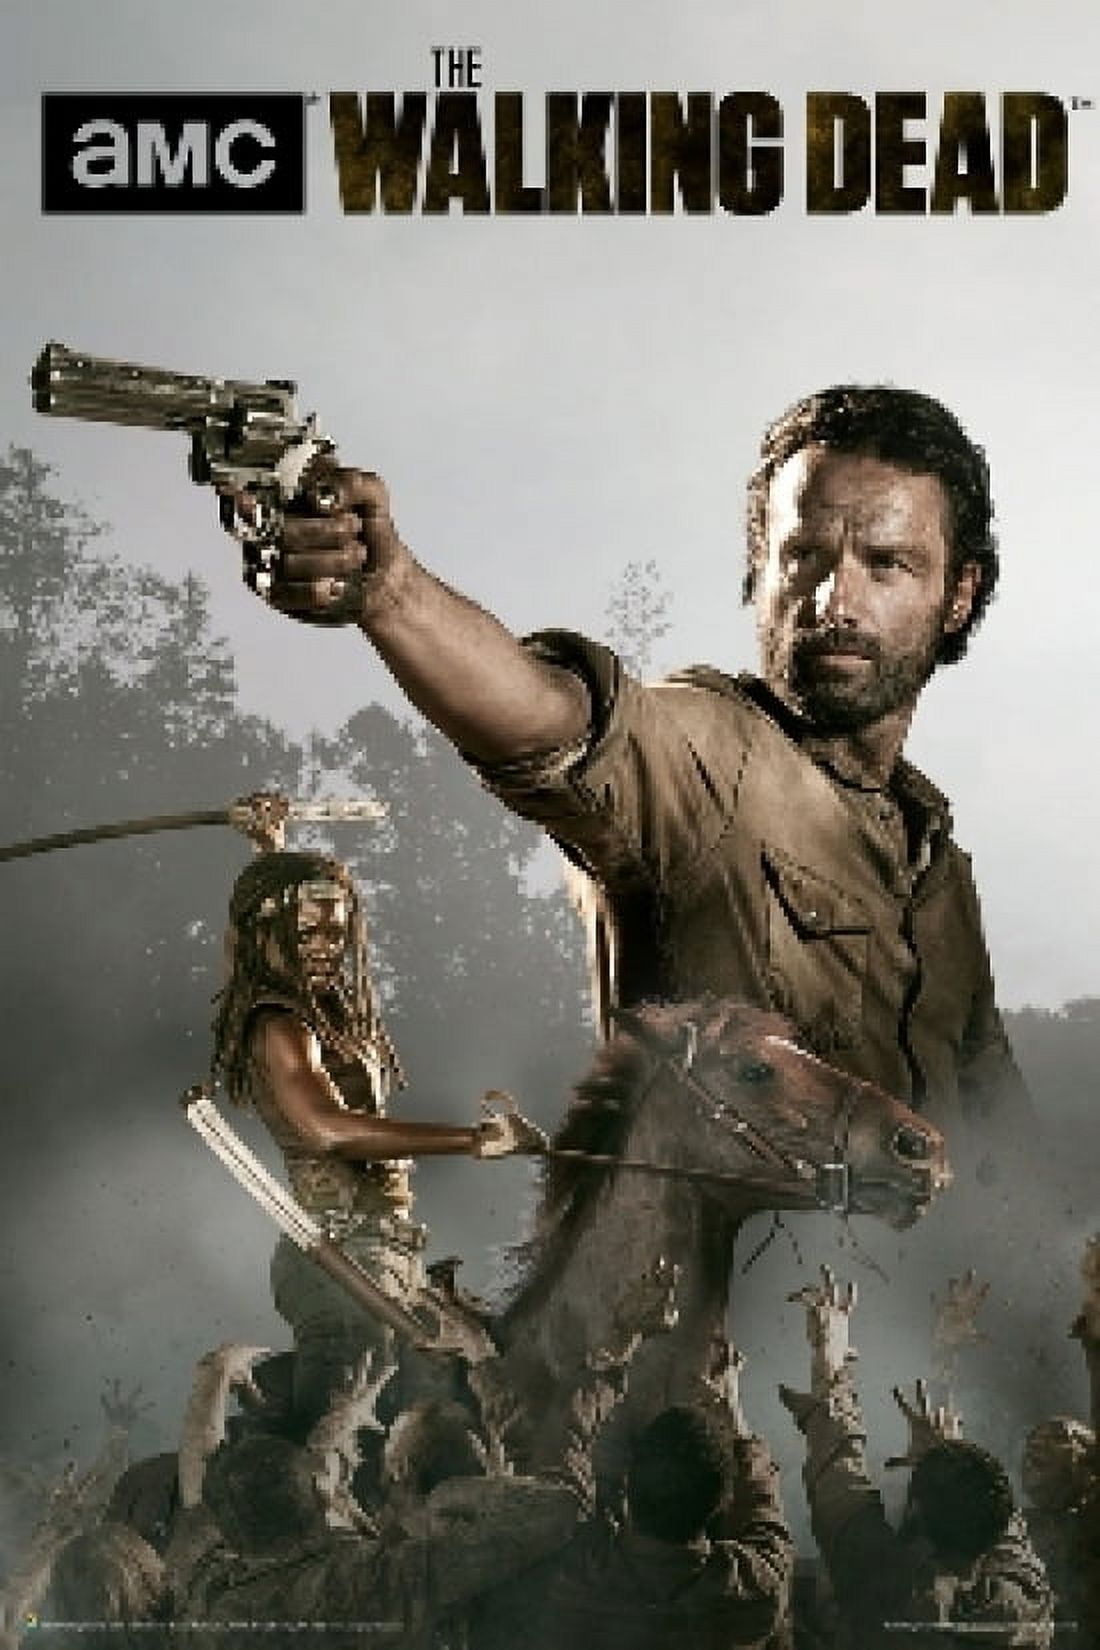 The Walking Dead Season 4 - Rick And Michonne Poster (24 X 36)